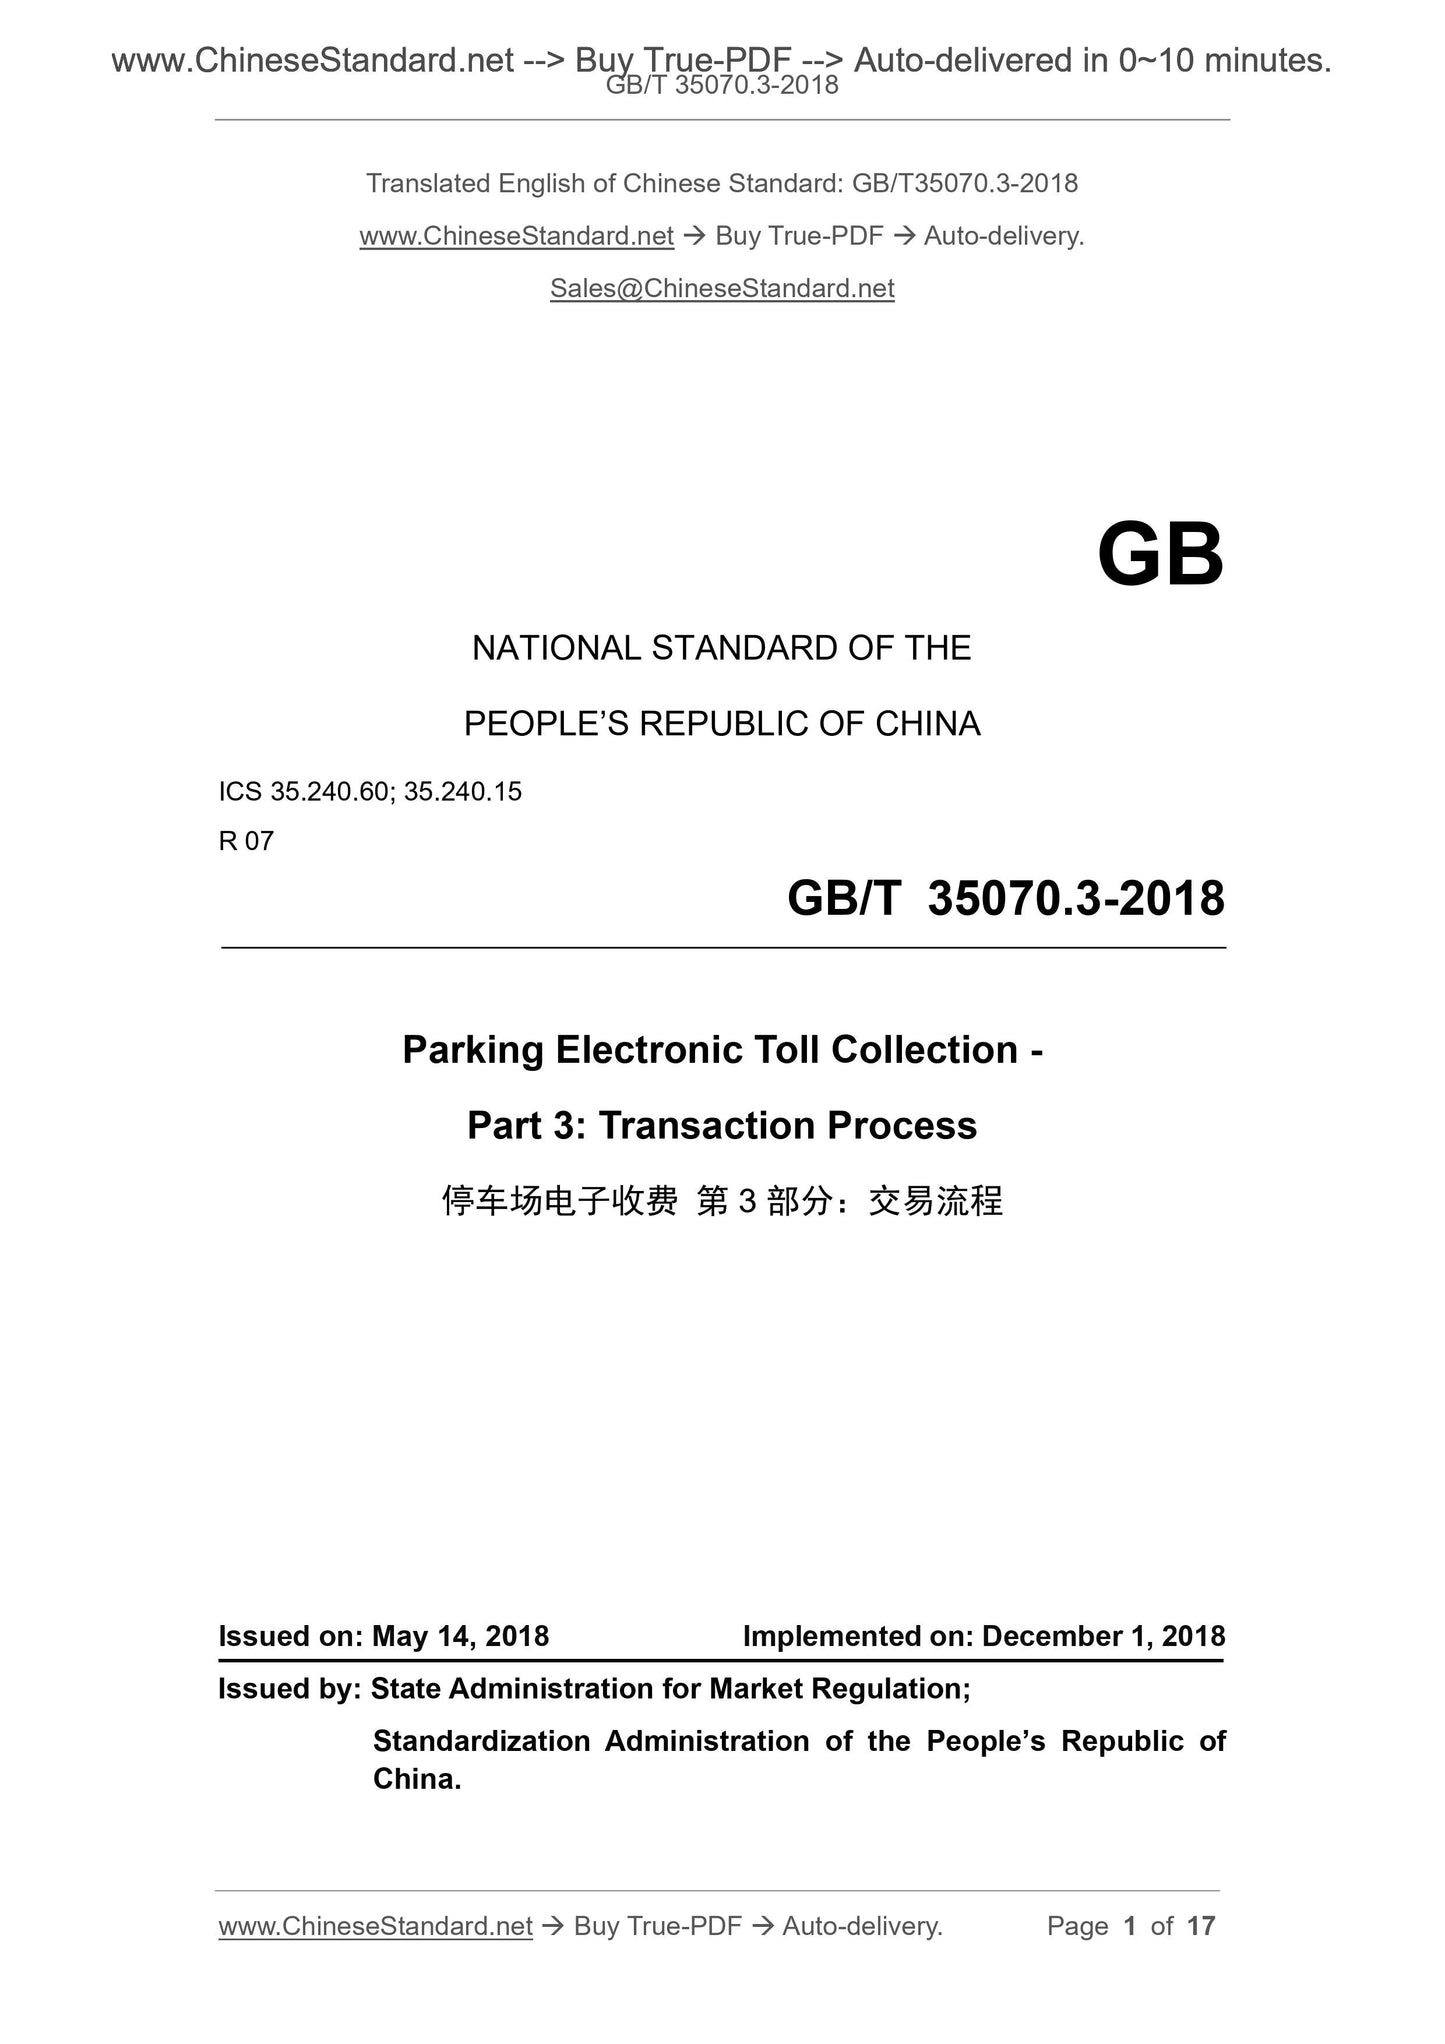 GB/T 35070.3-2018 Page 1